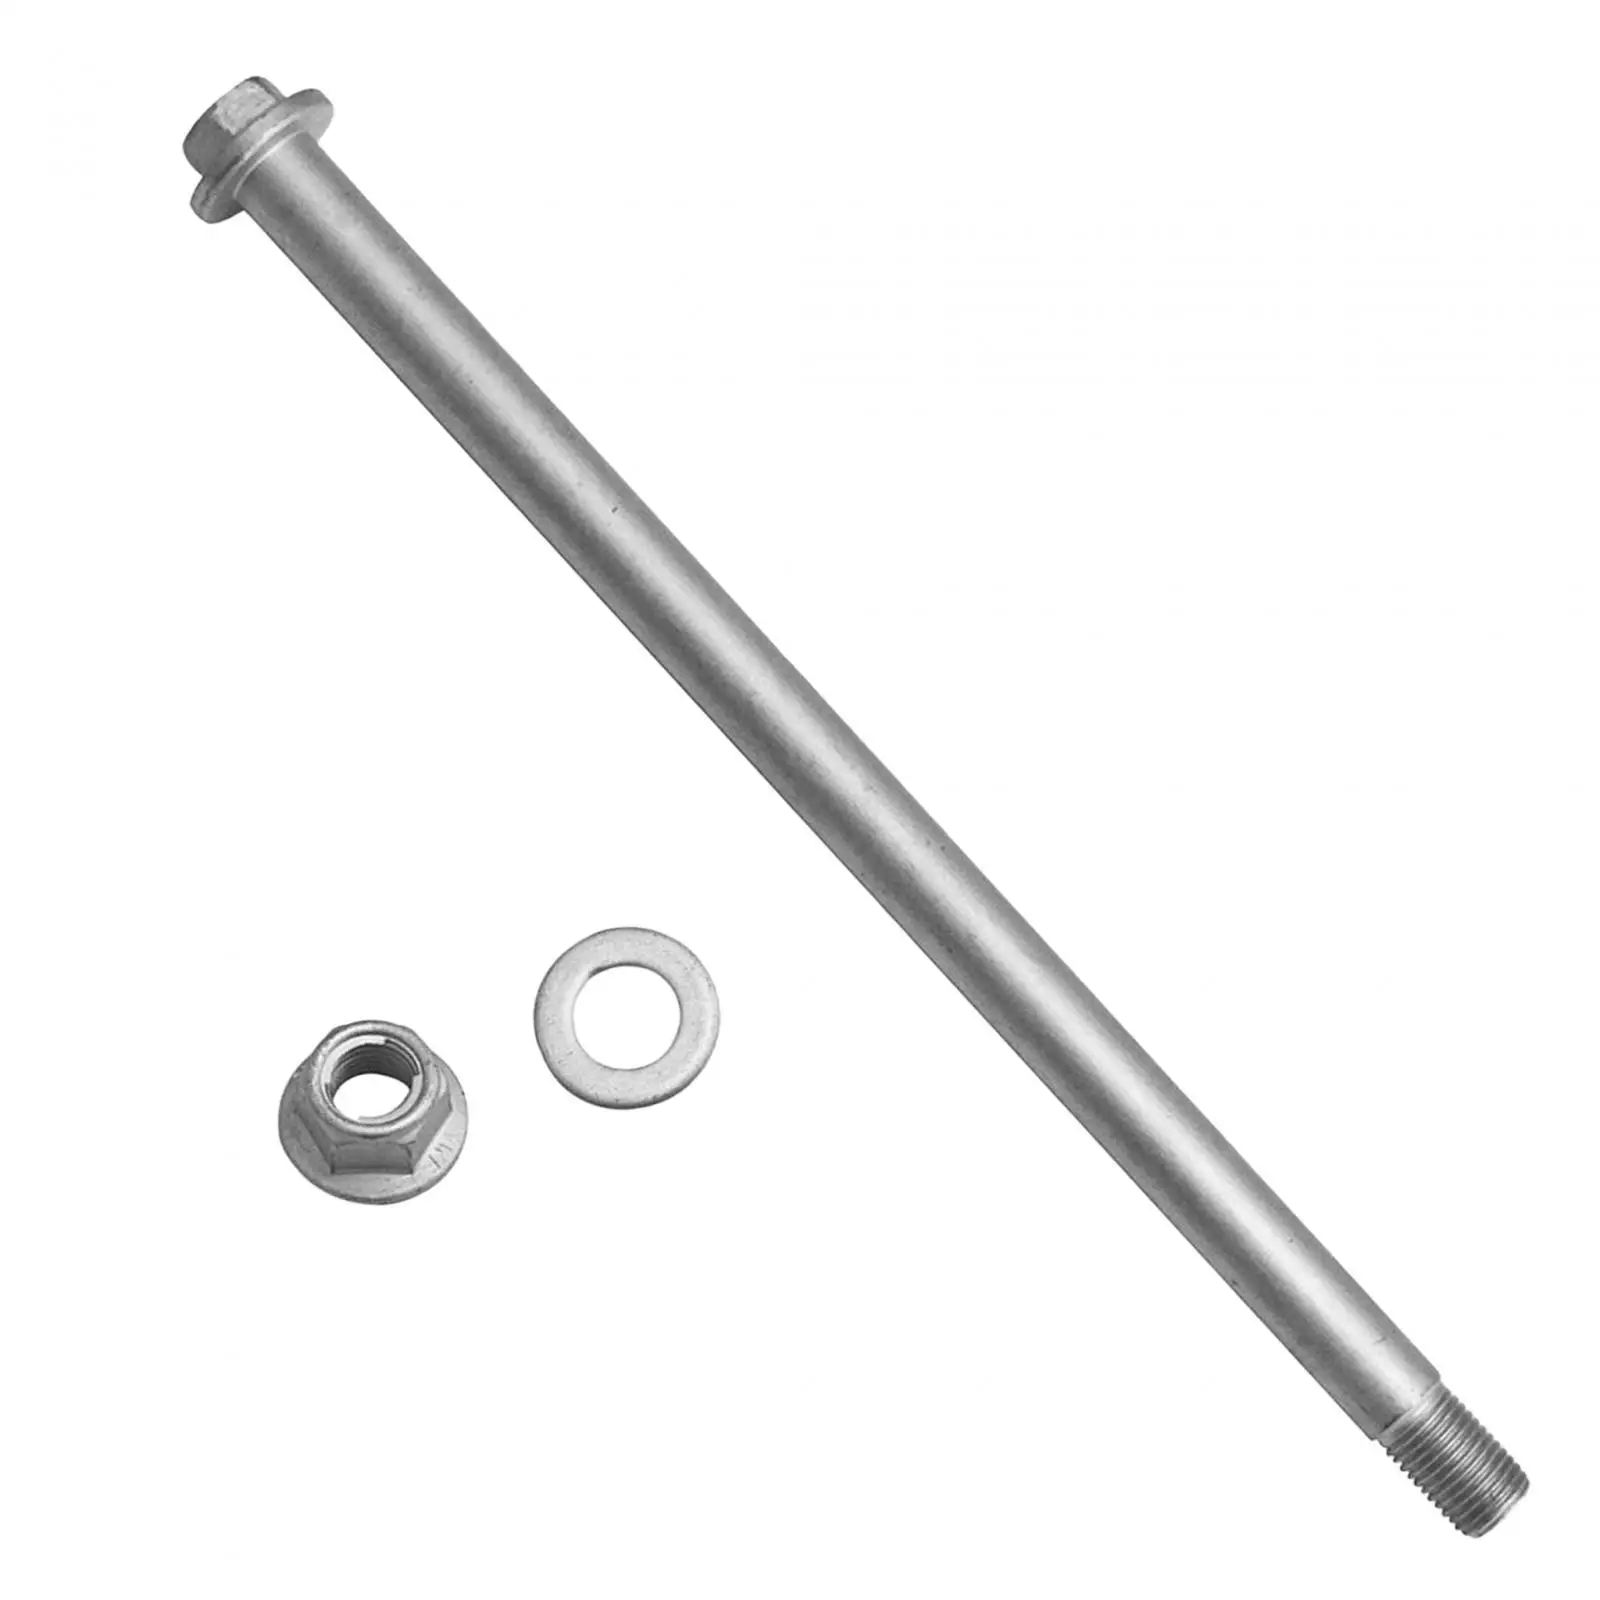 Swing Arm Bolt Motorbike Rear Swing Arm Bolt and Nut for TRX 450R Parts